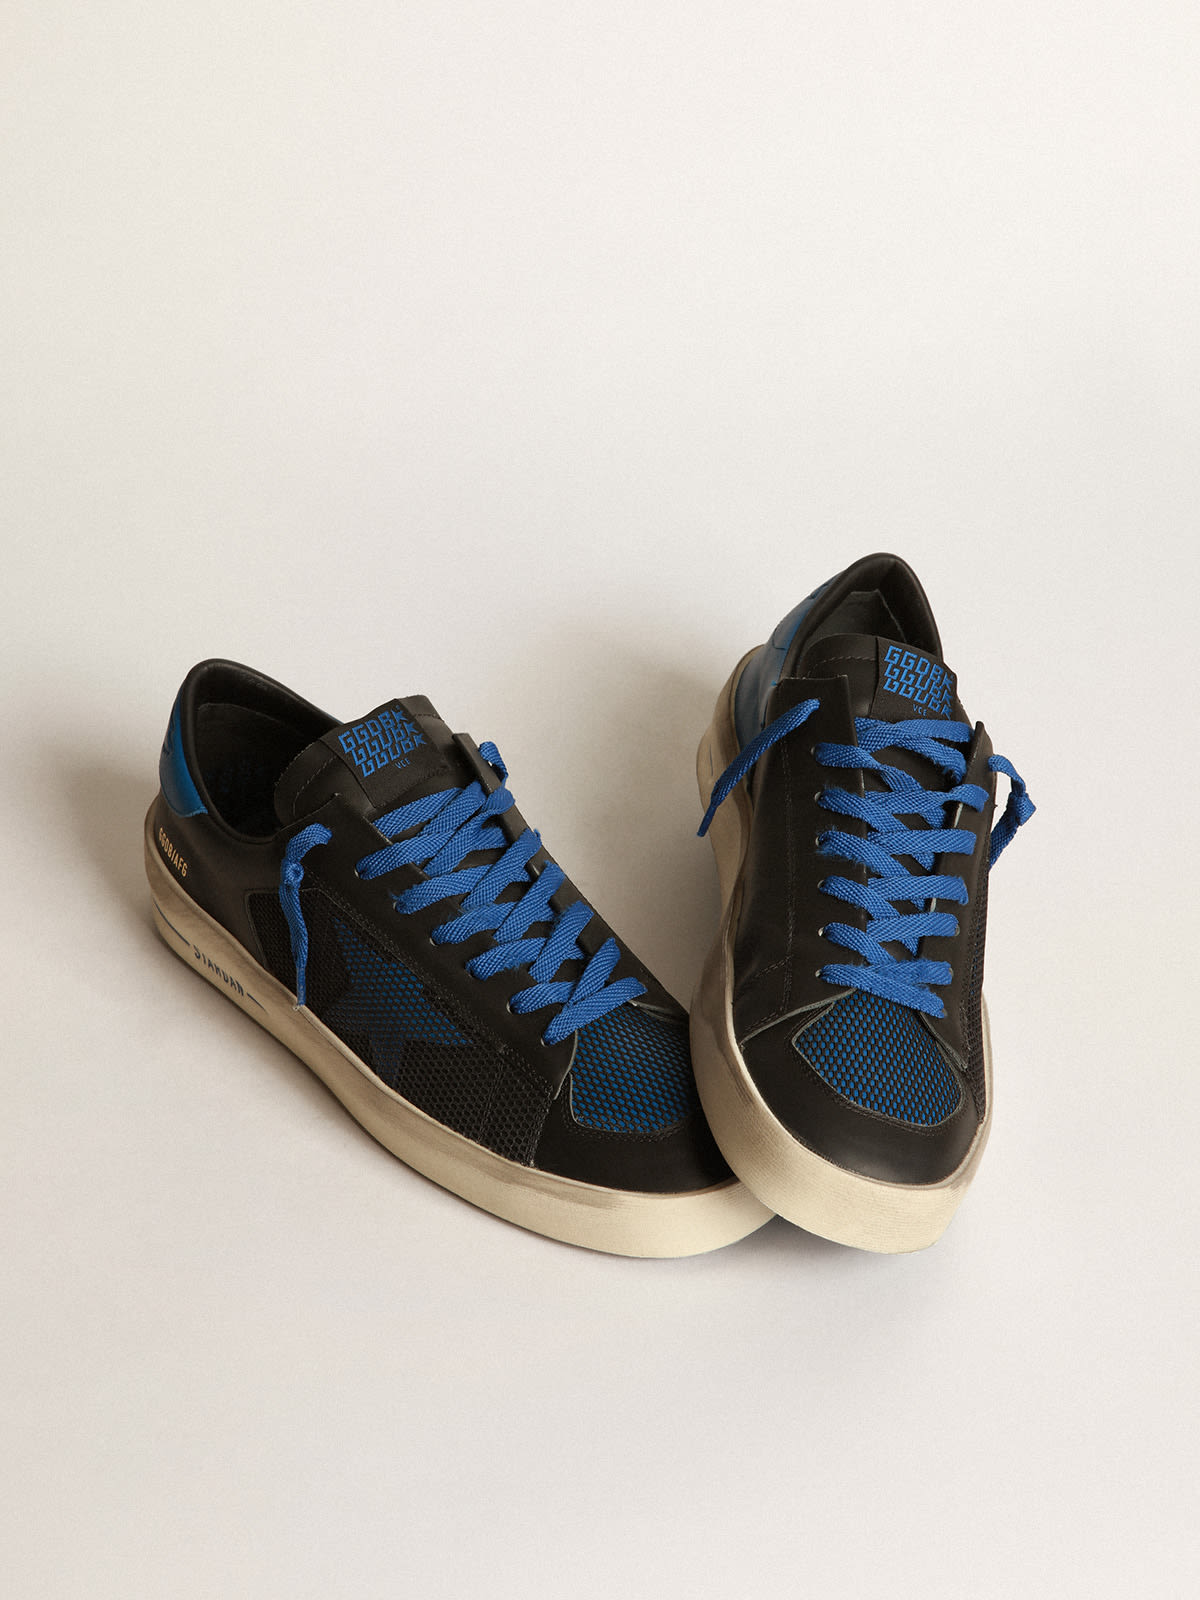 Golden Goose - Stardan sneakers in black and light blue leather with black mesh inserts and a light blue leather star    in 